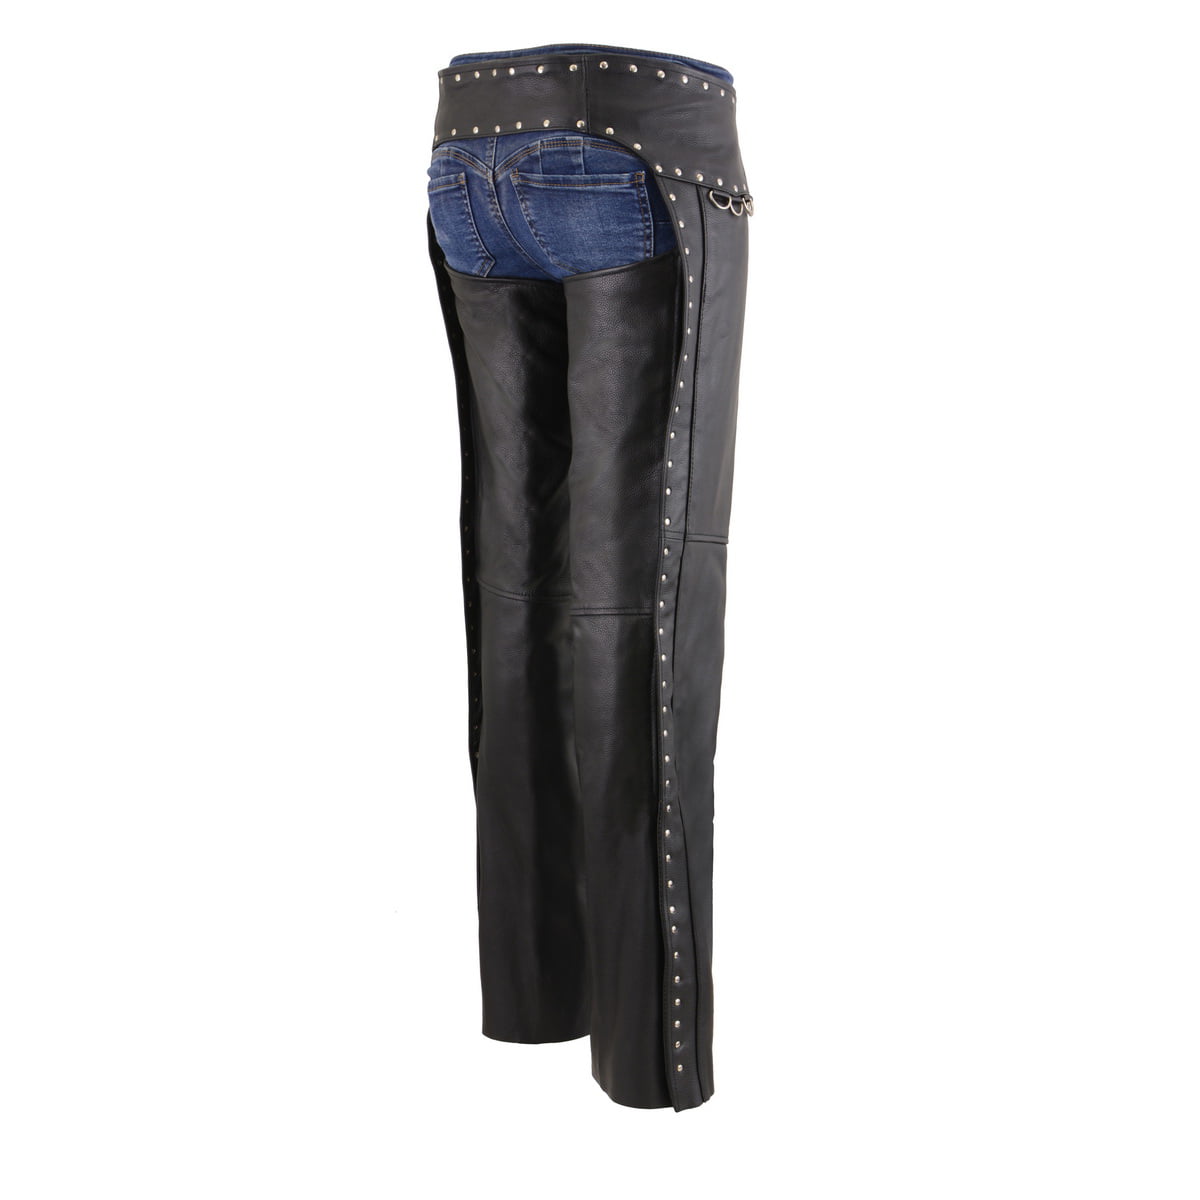 Black/Pink, X-Small Milwaukee Womens Leather Chaps 